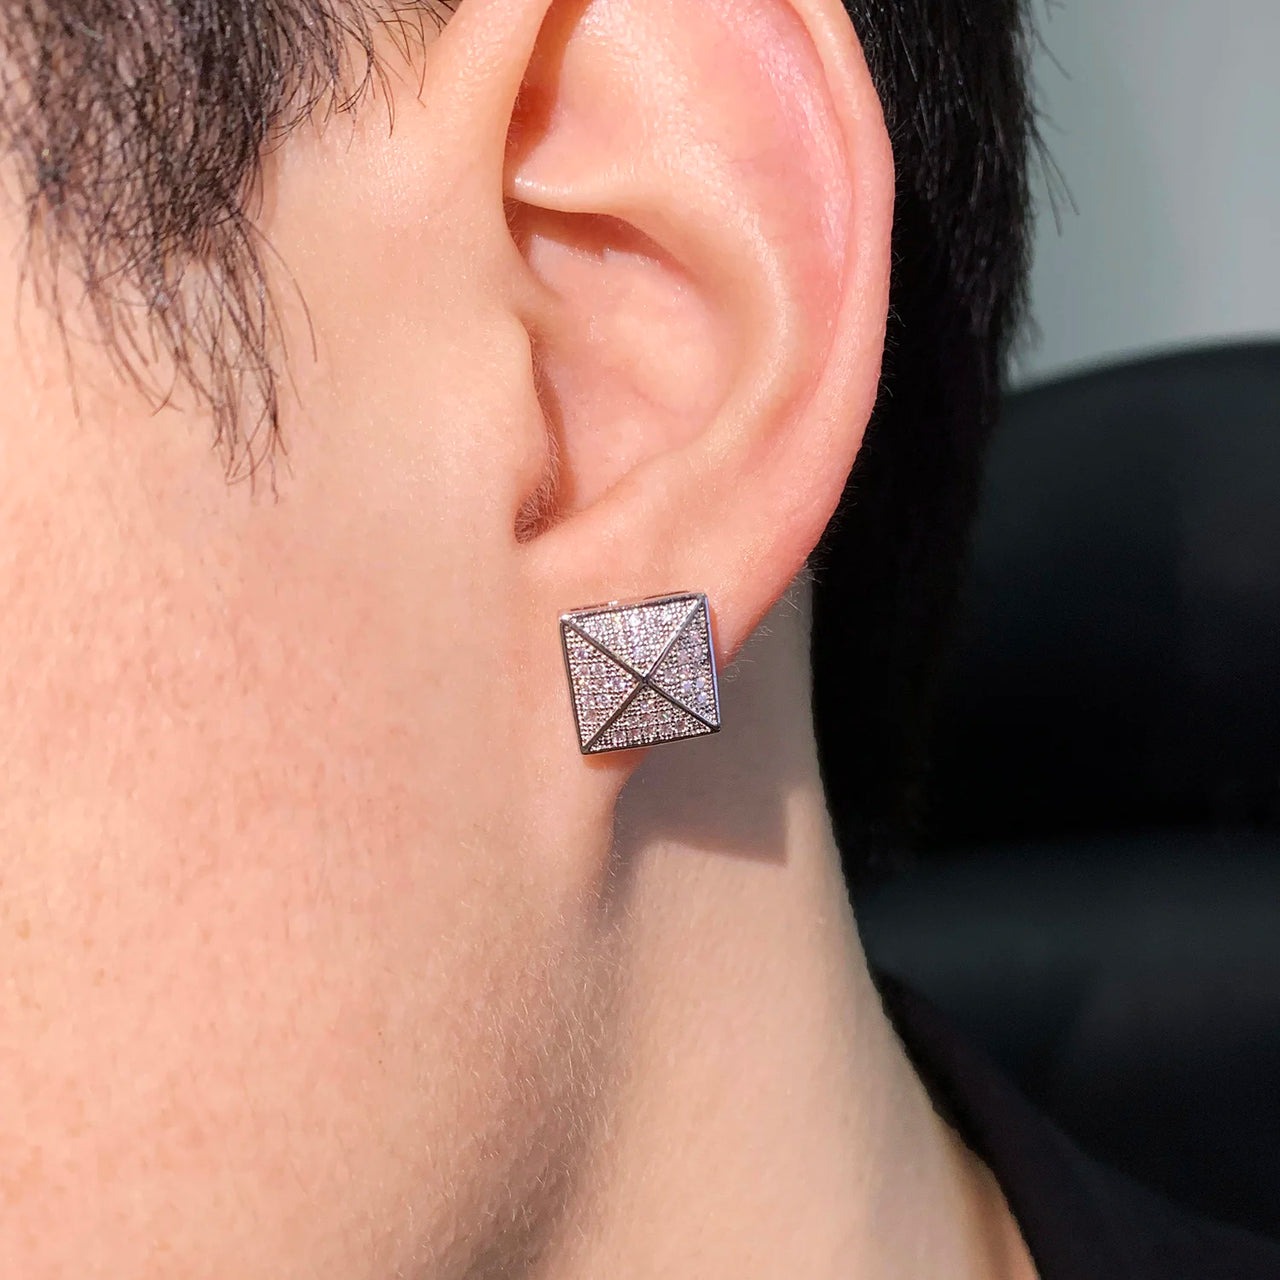 10mm Square Cut Umbrella Earrings - Different Drips